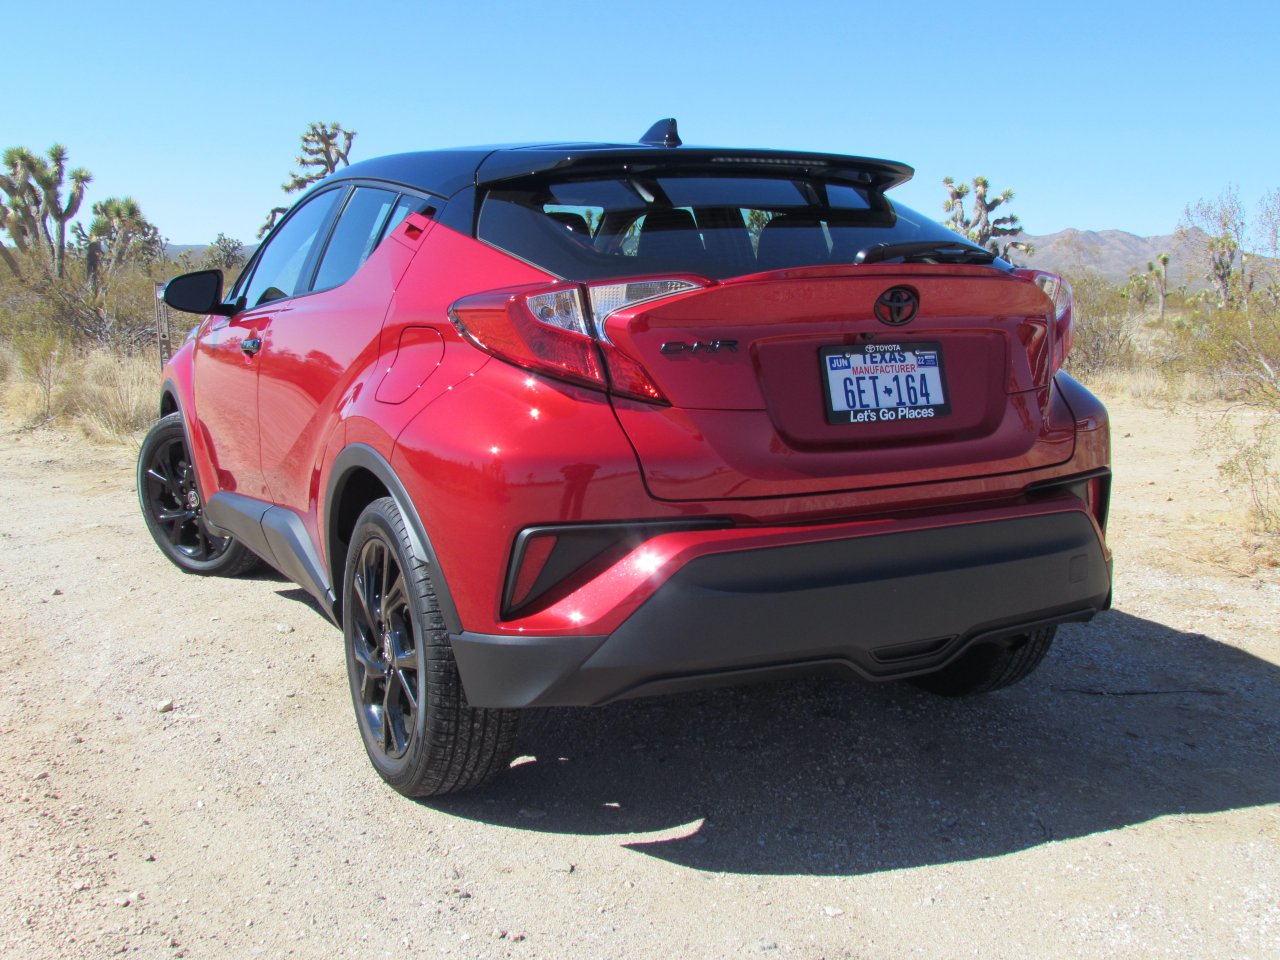 Toyota’s C-HR has some delightful details